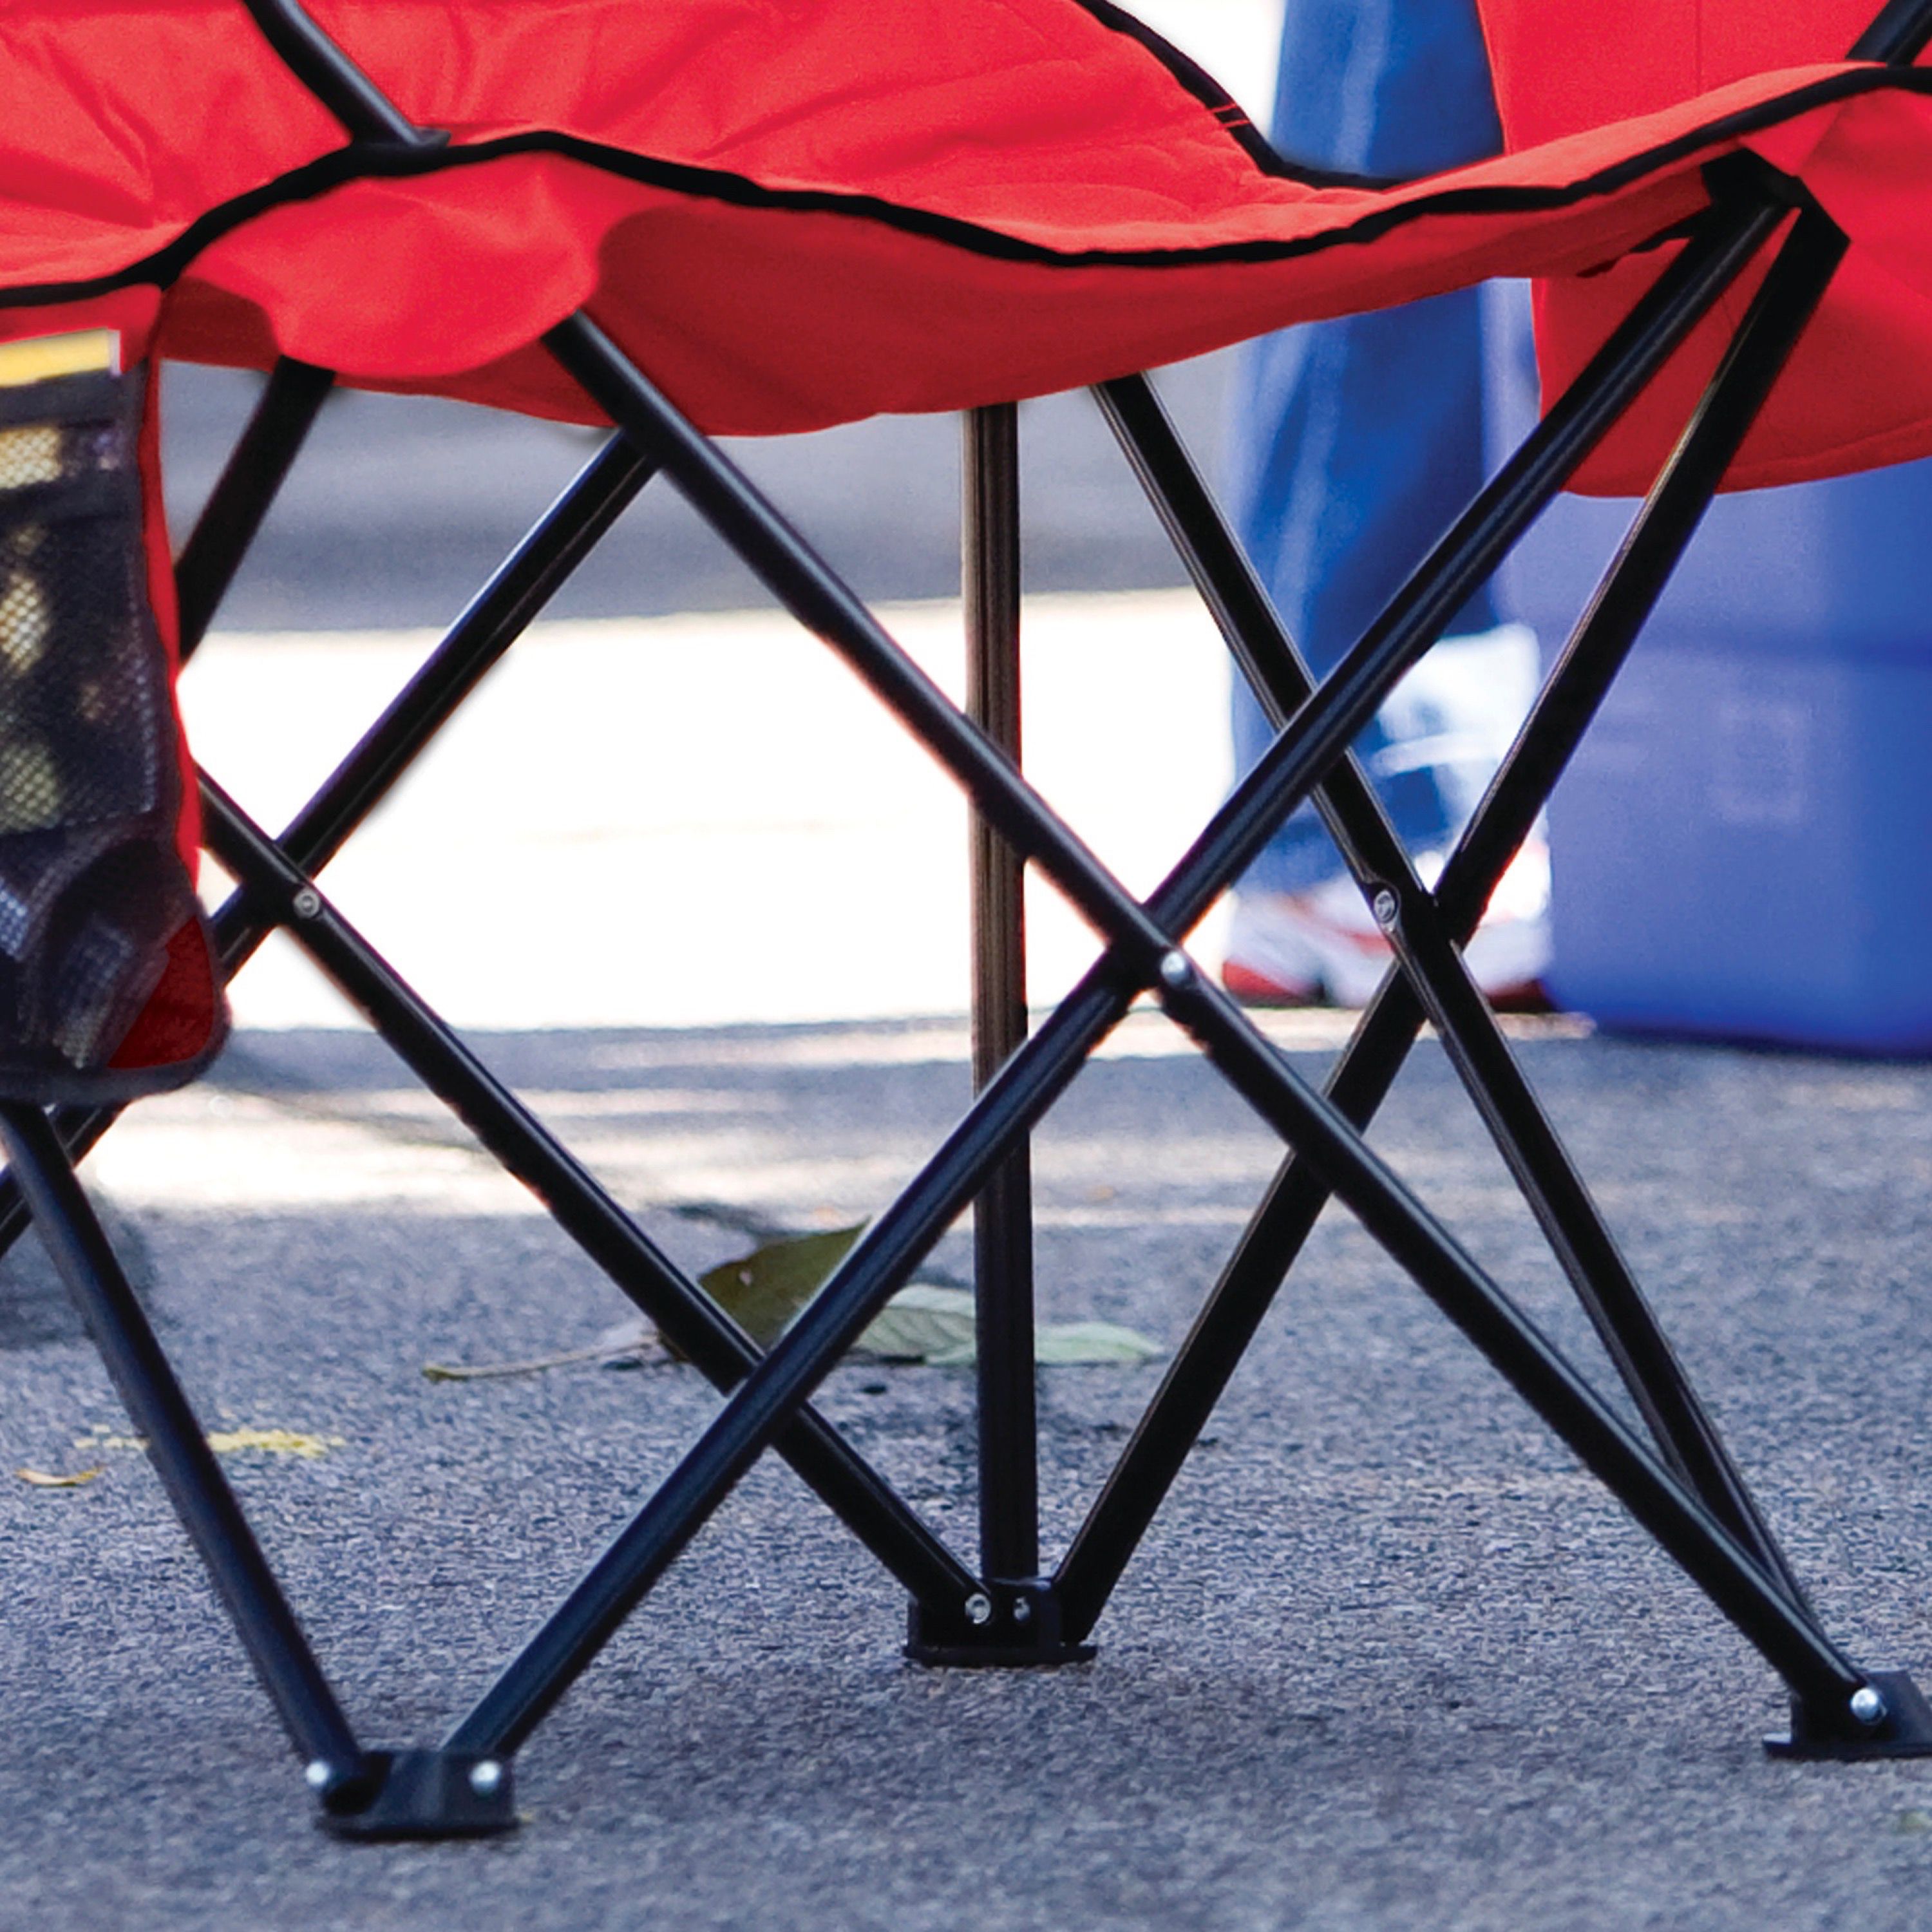 Coleman® Camping Chair with Built-In 4-Can Cooler, Red - image 2 of 6